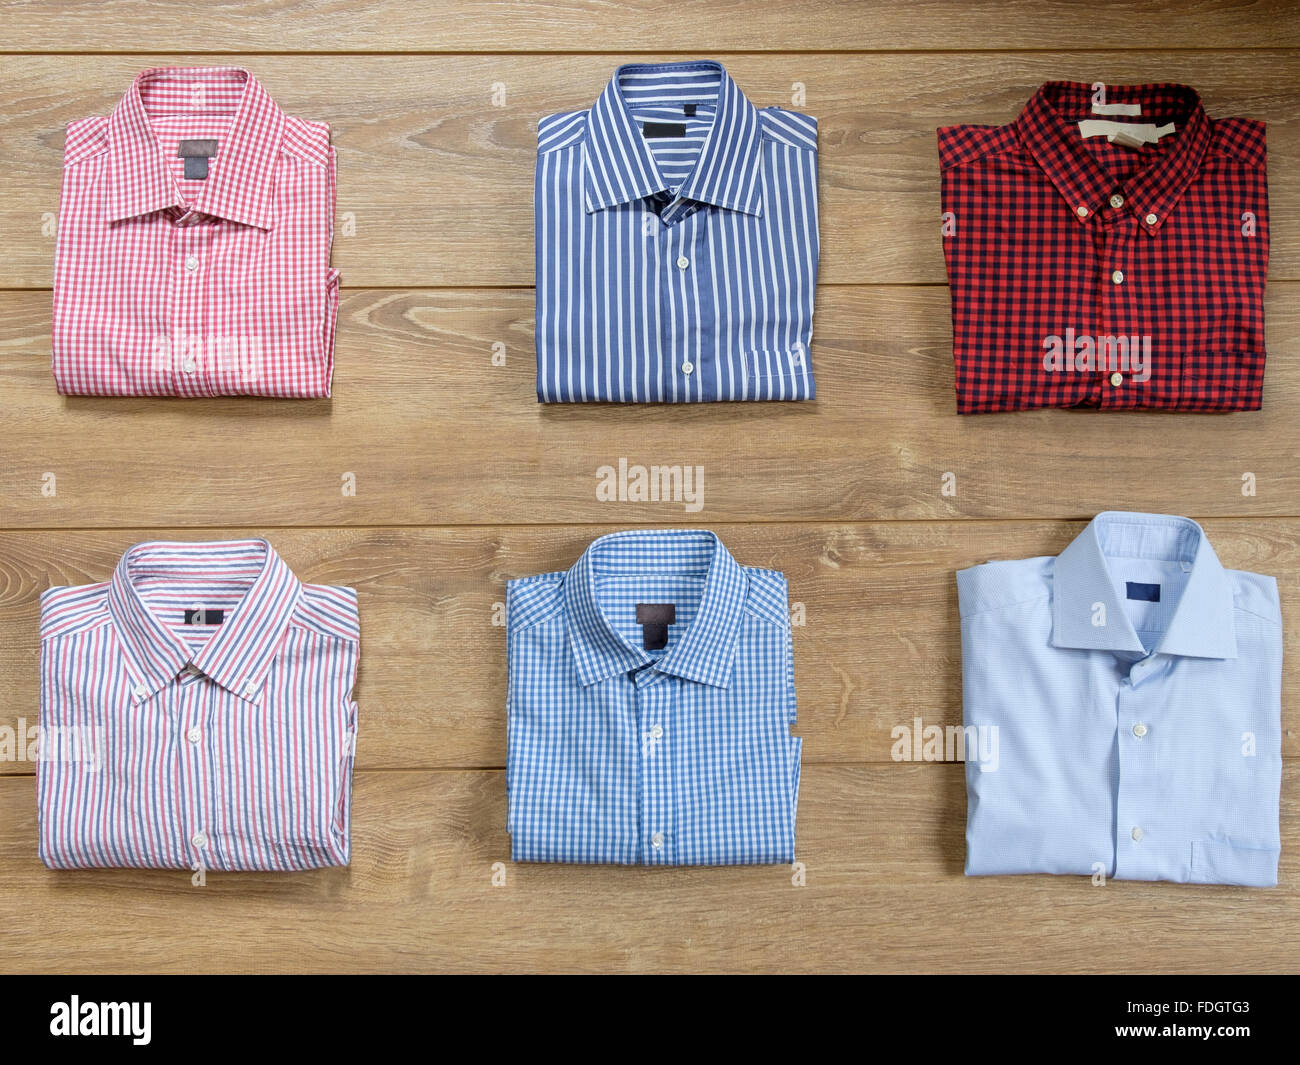 wooden with different type of shirts Stock Photo